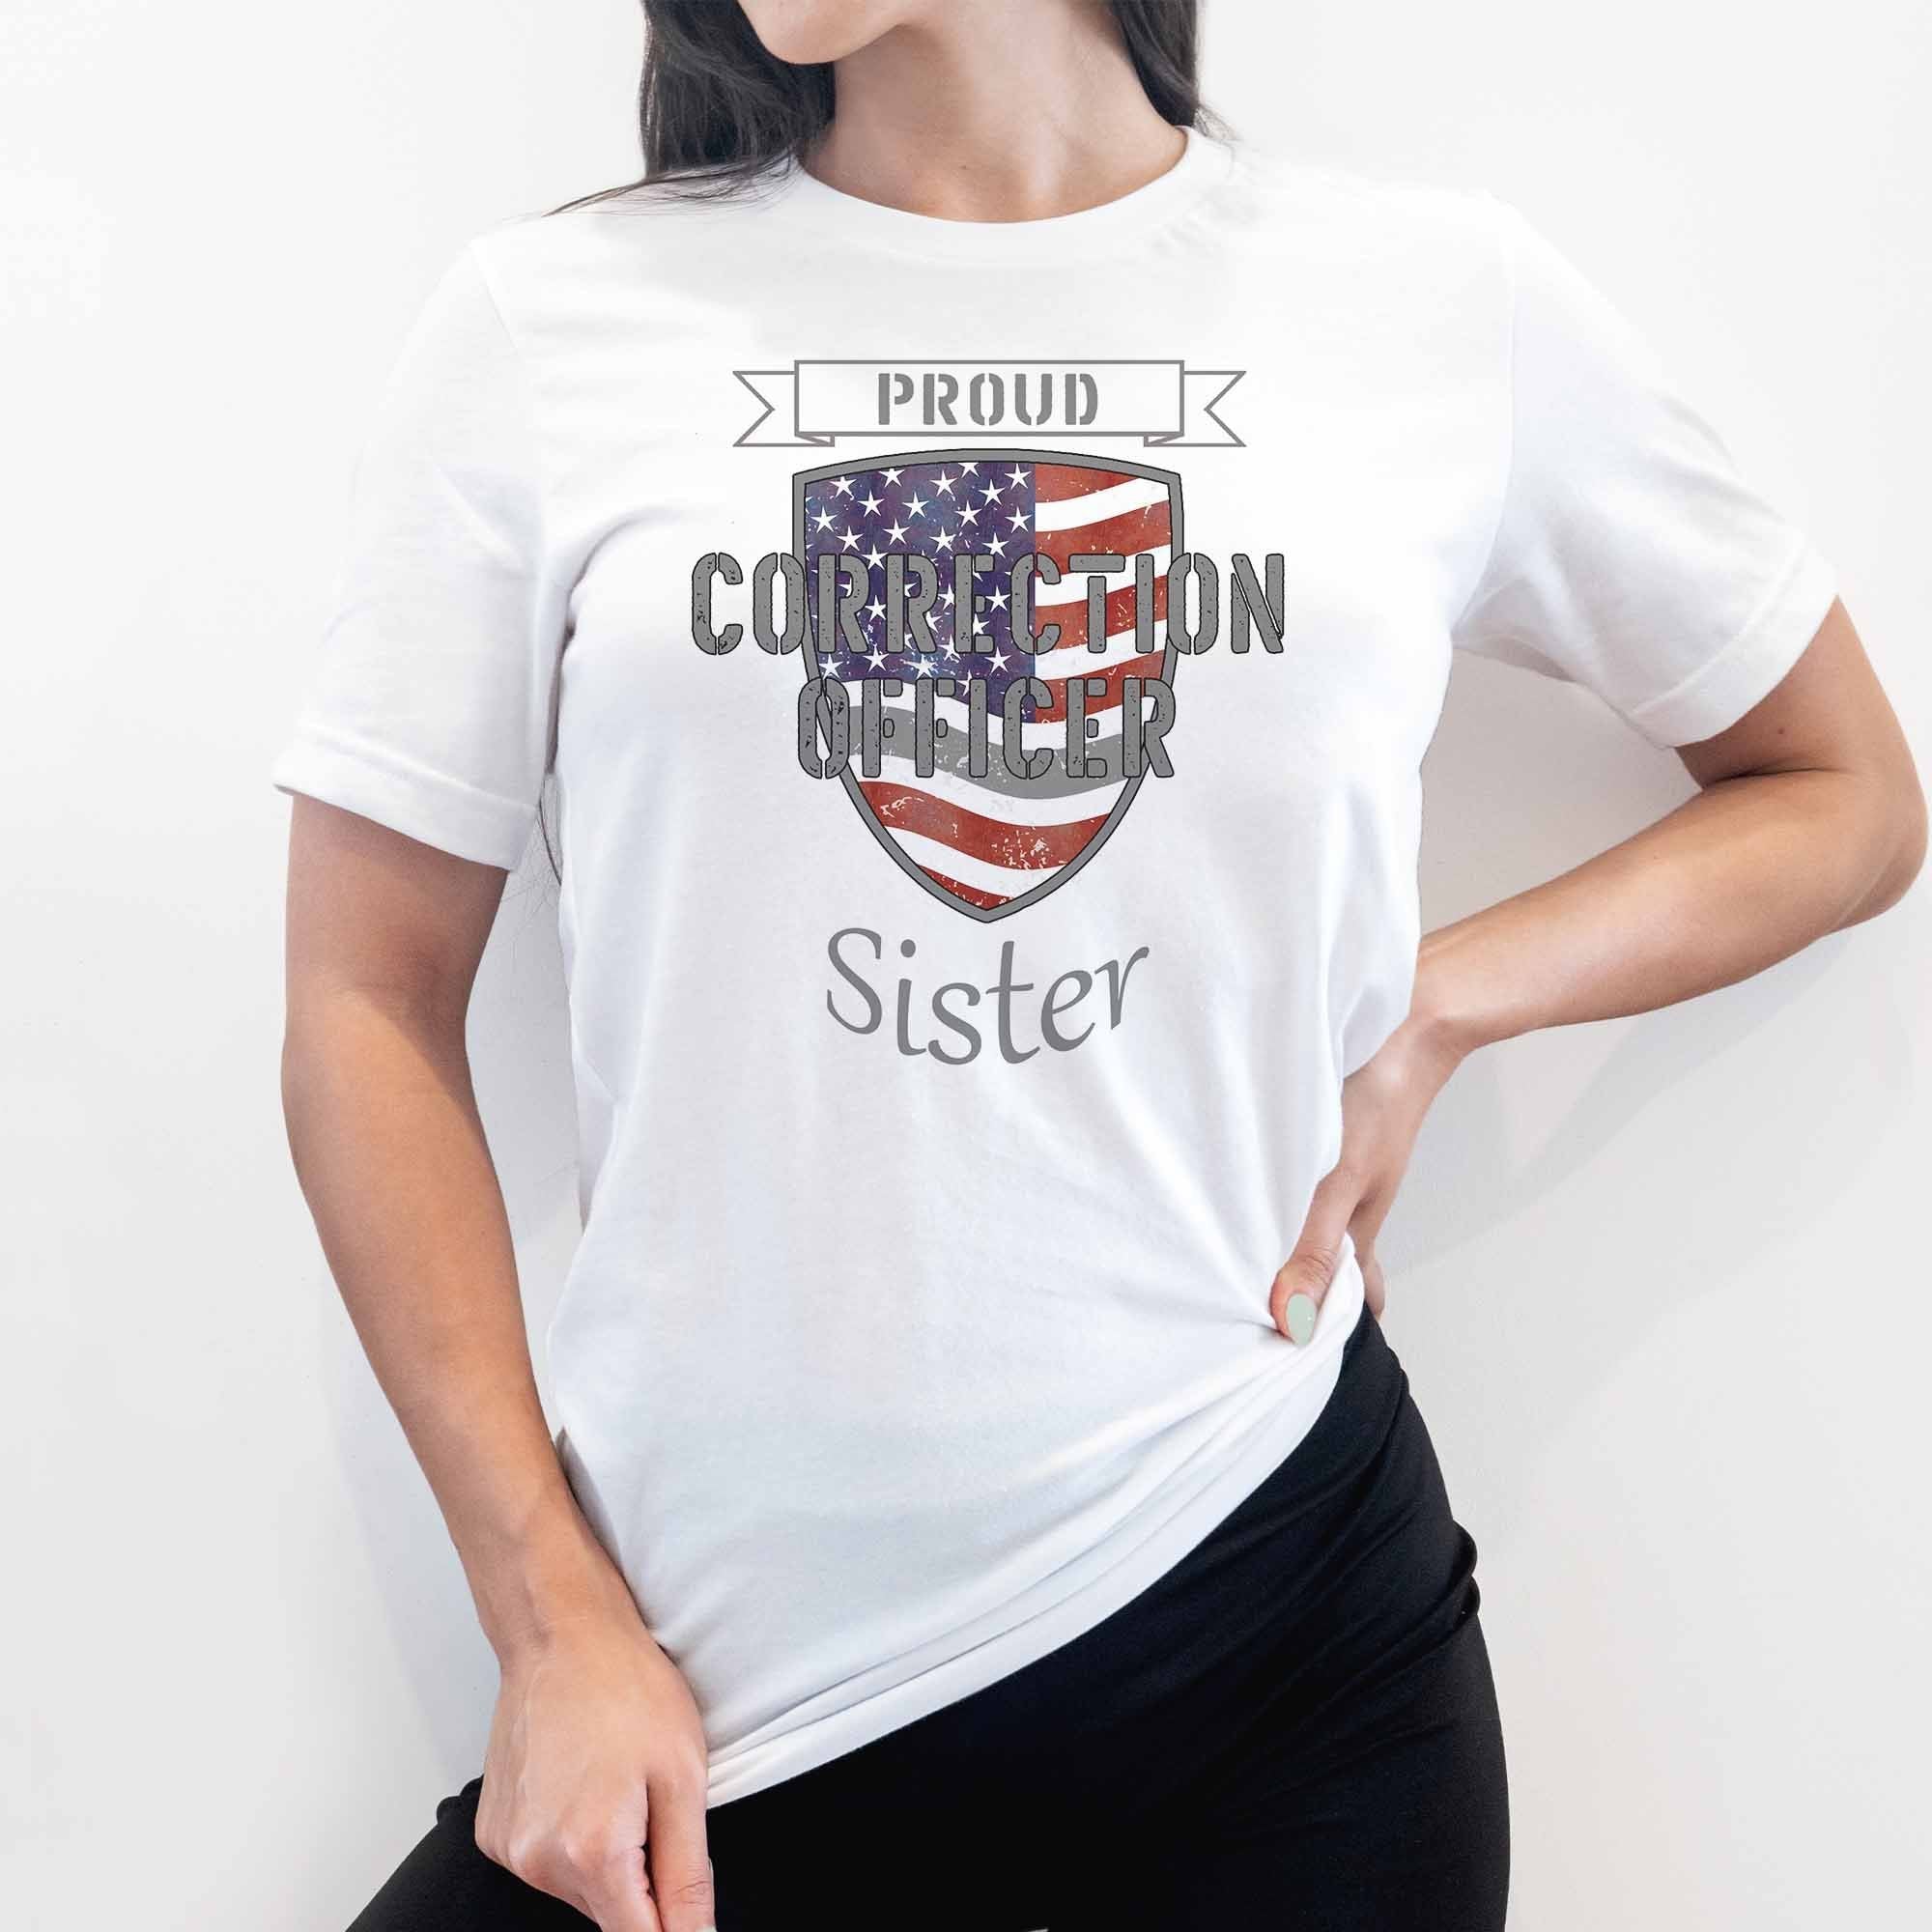 Proud Correction Officer Sister - My Custom Tee Party